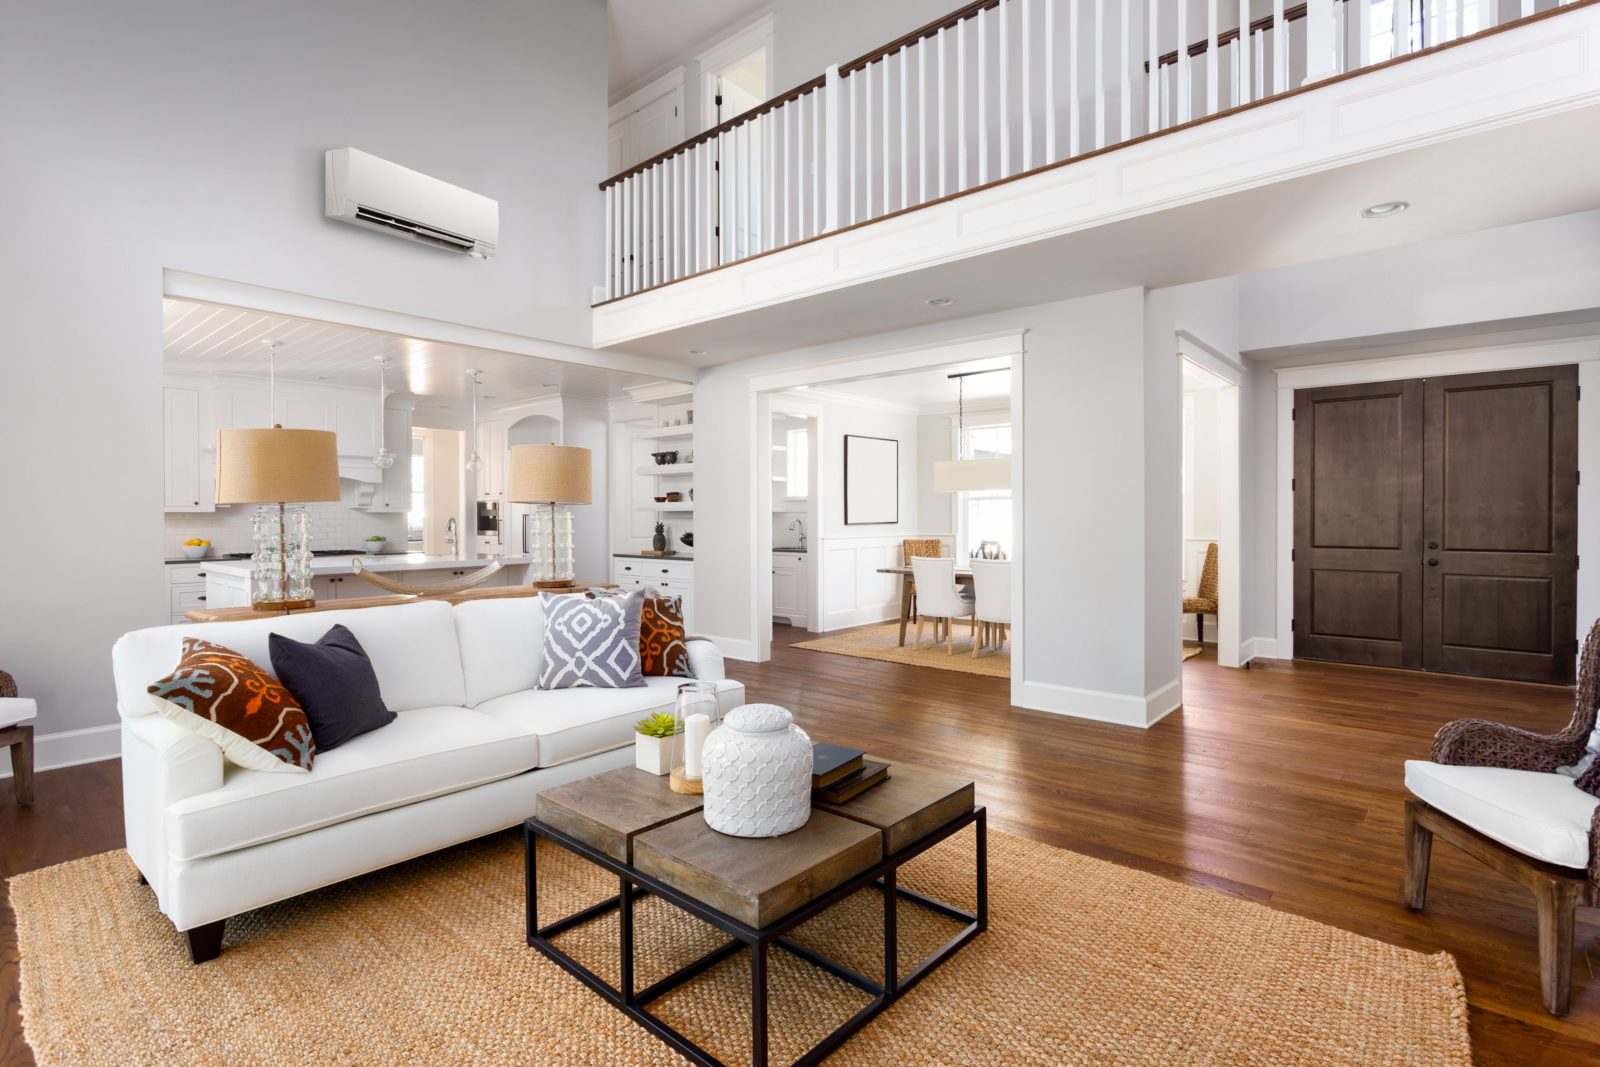 Mitsubishi Electric ductless mini-splits in Central New Jersey